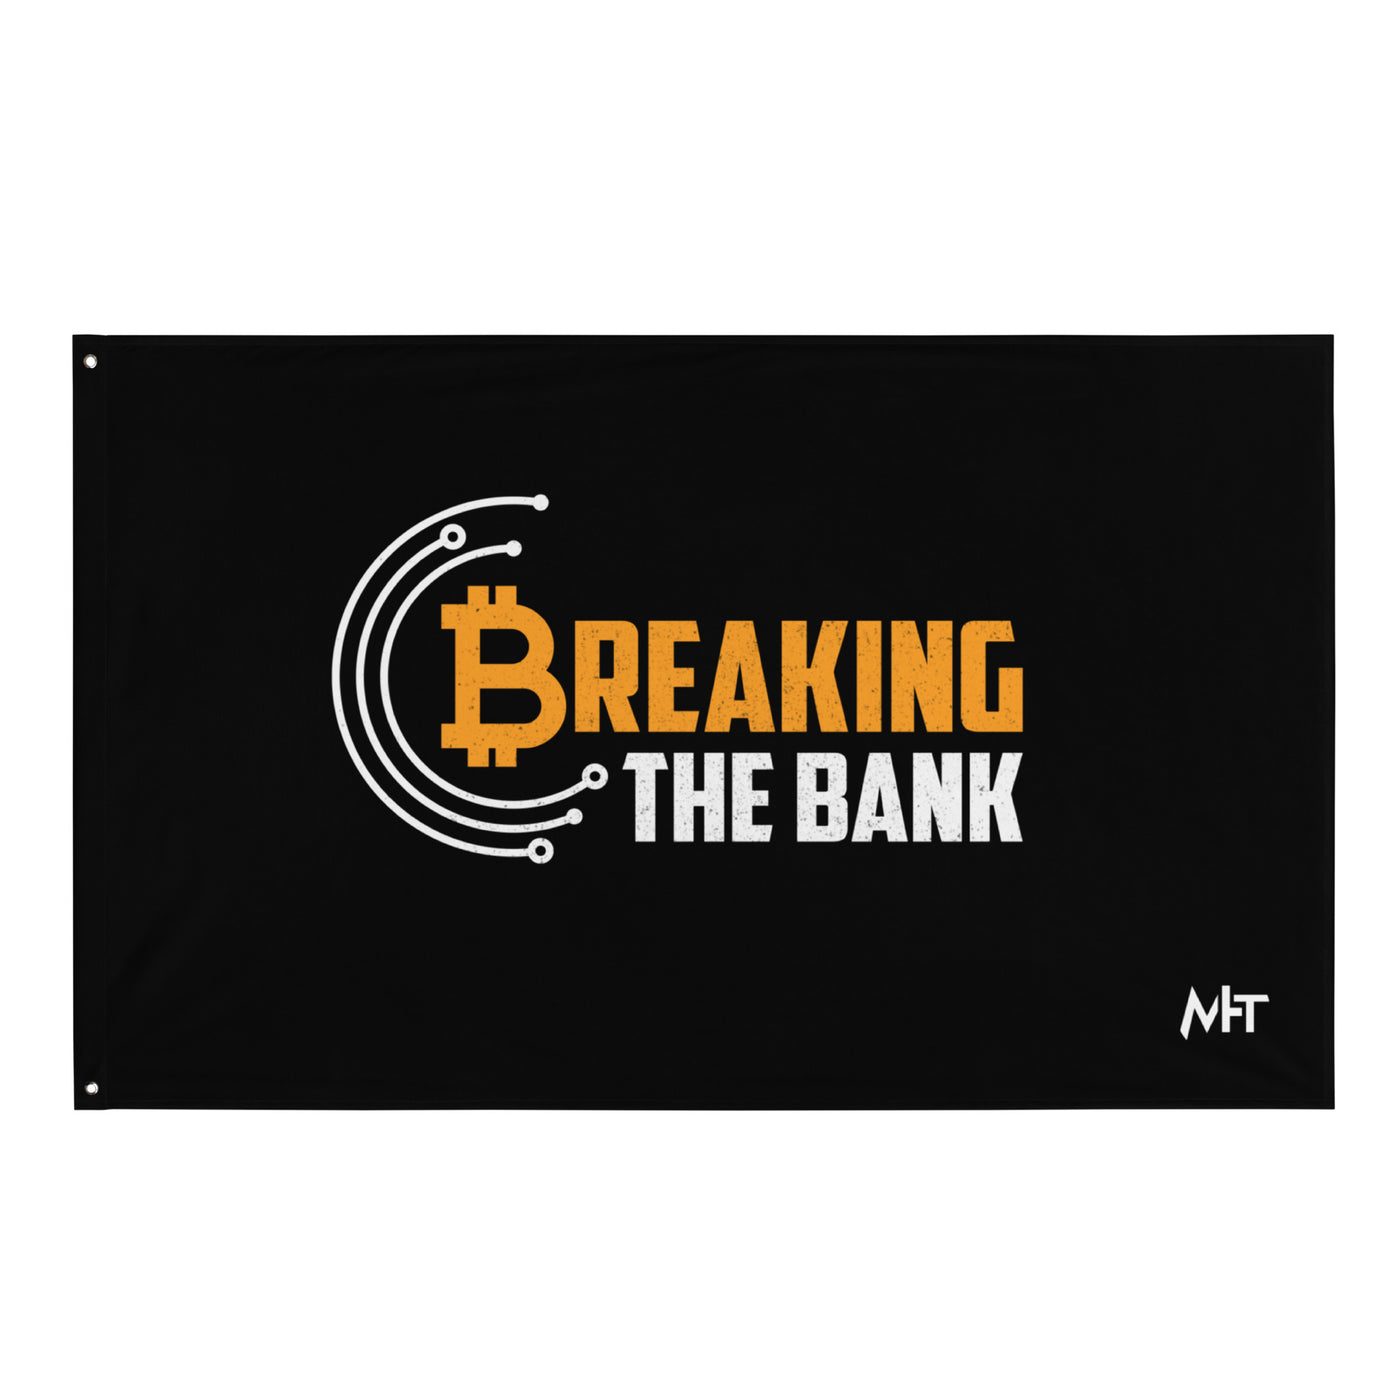 Breaking the Bank - Flag